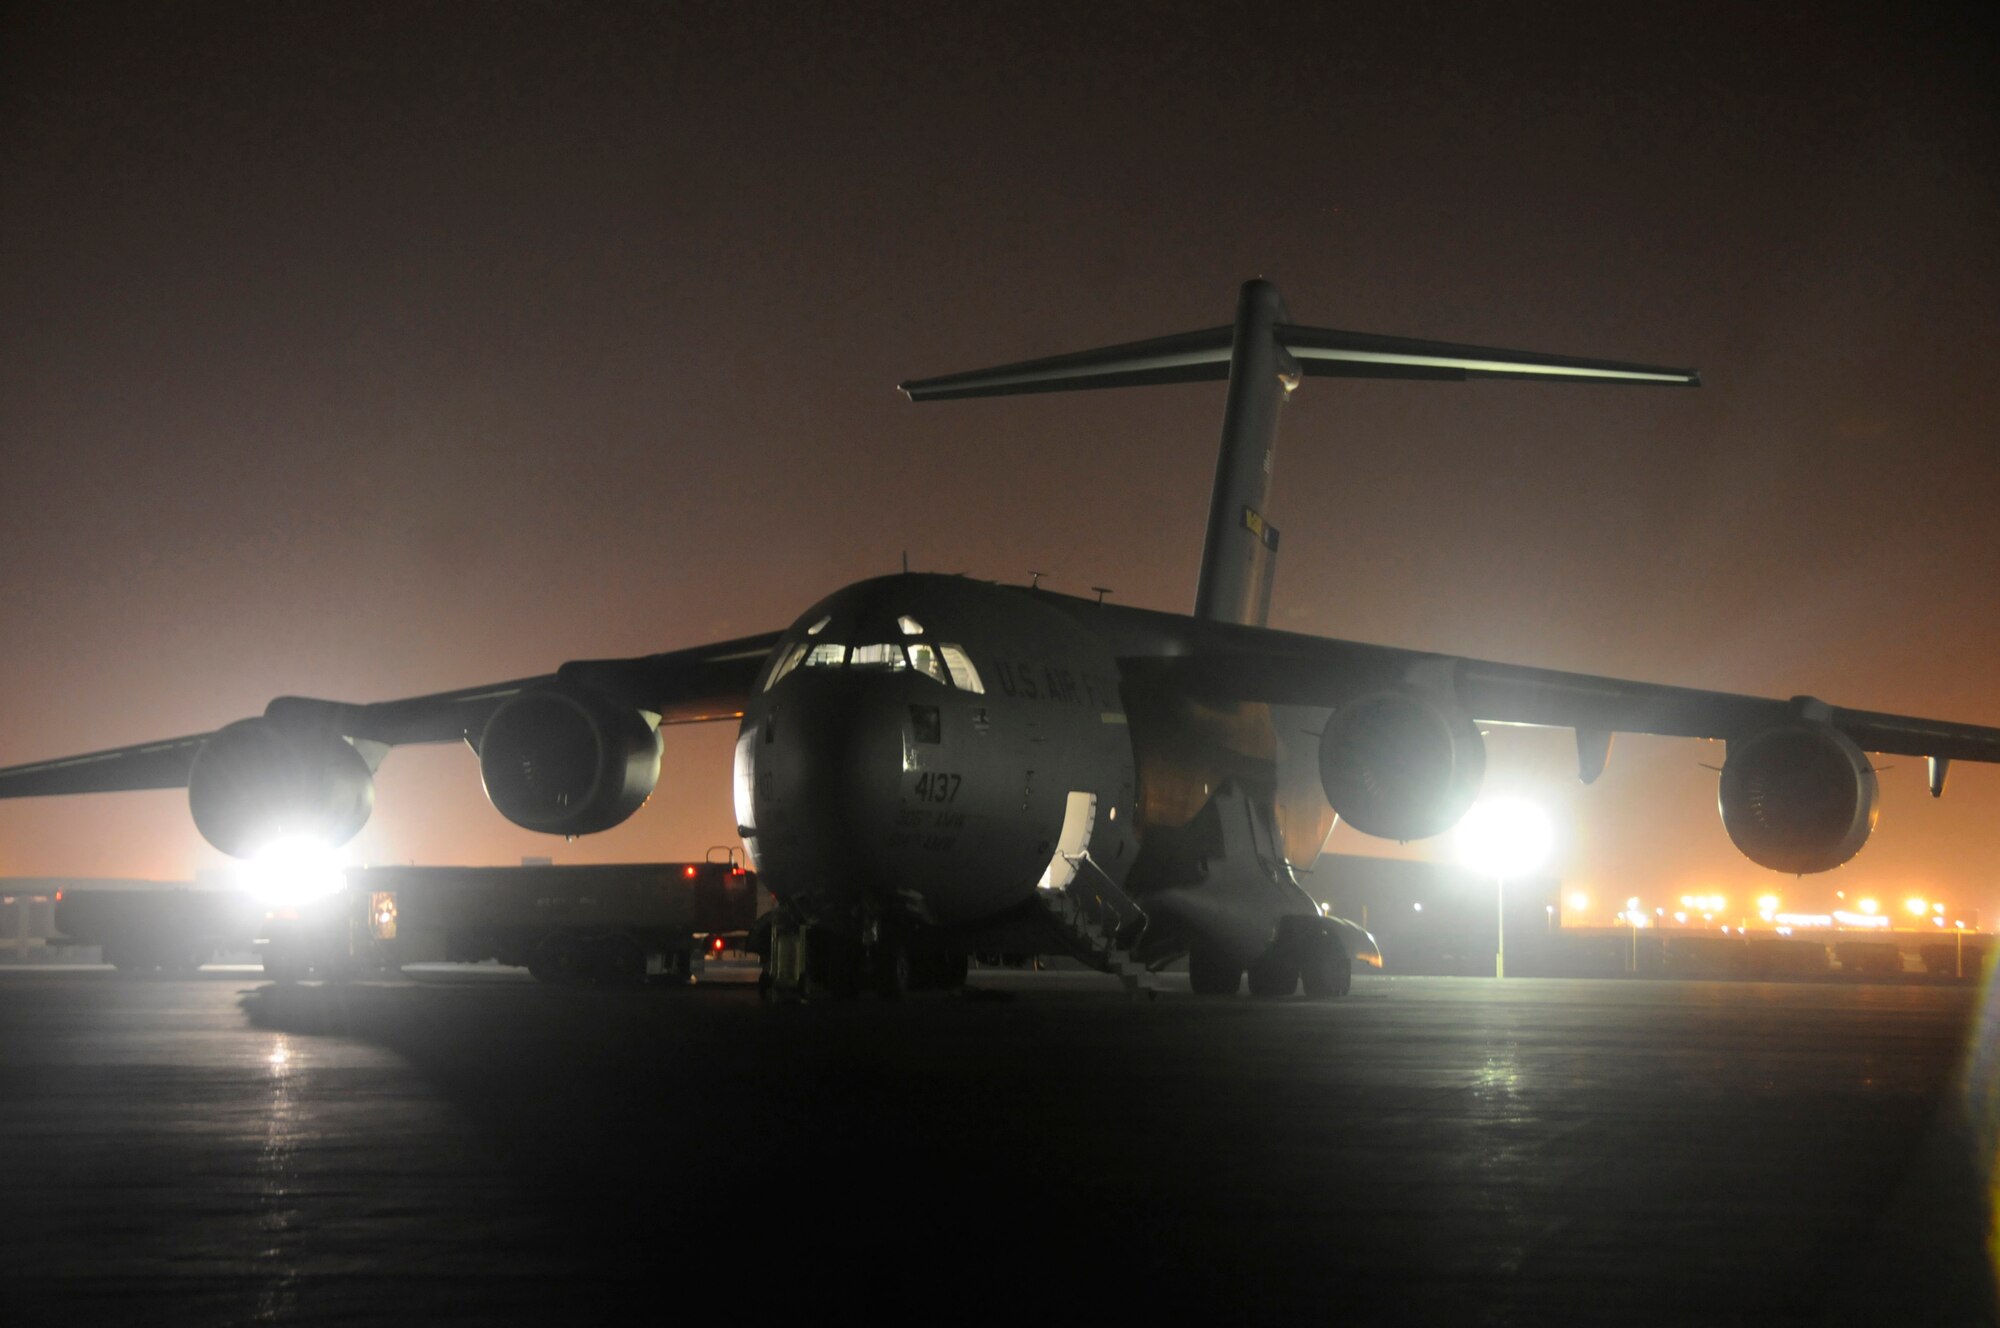 A C-17 Globemaster III is refueled at an undisclosed air base in Southwest Asia in preparation for another mission resupplying the Global War on Terrorism Oct. 29. The C-17 is the U.S. Air Force's premier cargo aircraft, capable of both strategic and tactical airlift, and is a mainstay in supporting Operations Iraqi and Enduring Freedom and Joint Task Force-Horn of Africa.  (U.S. Air Force photo by Staff Sgt. Darnell T. Cannady/Released)